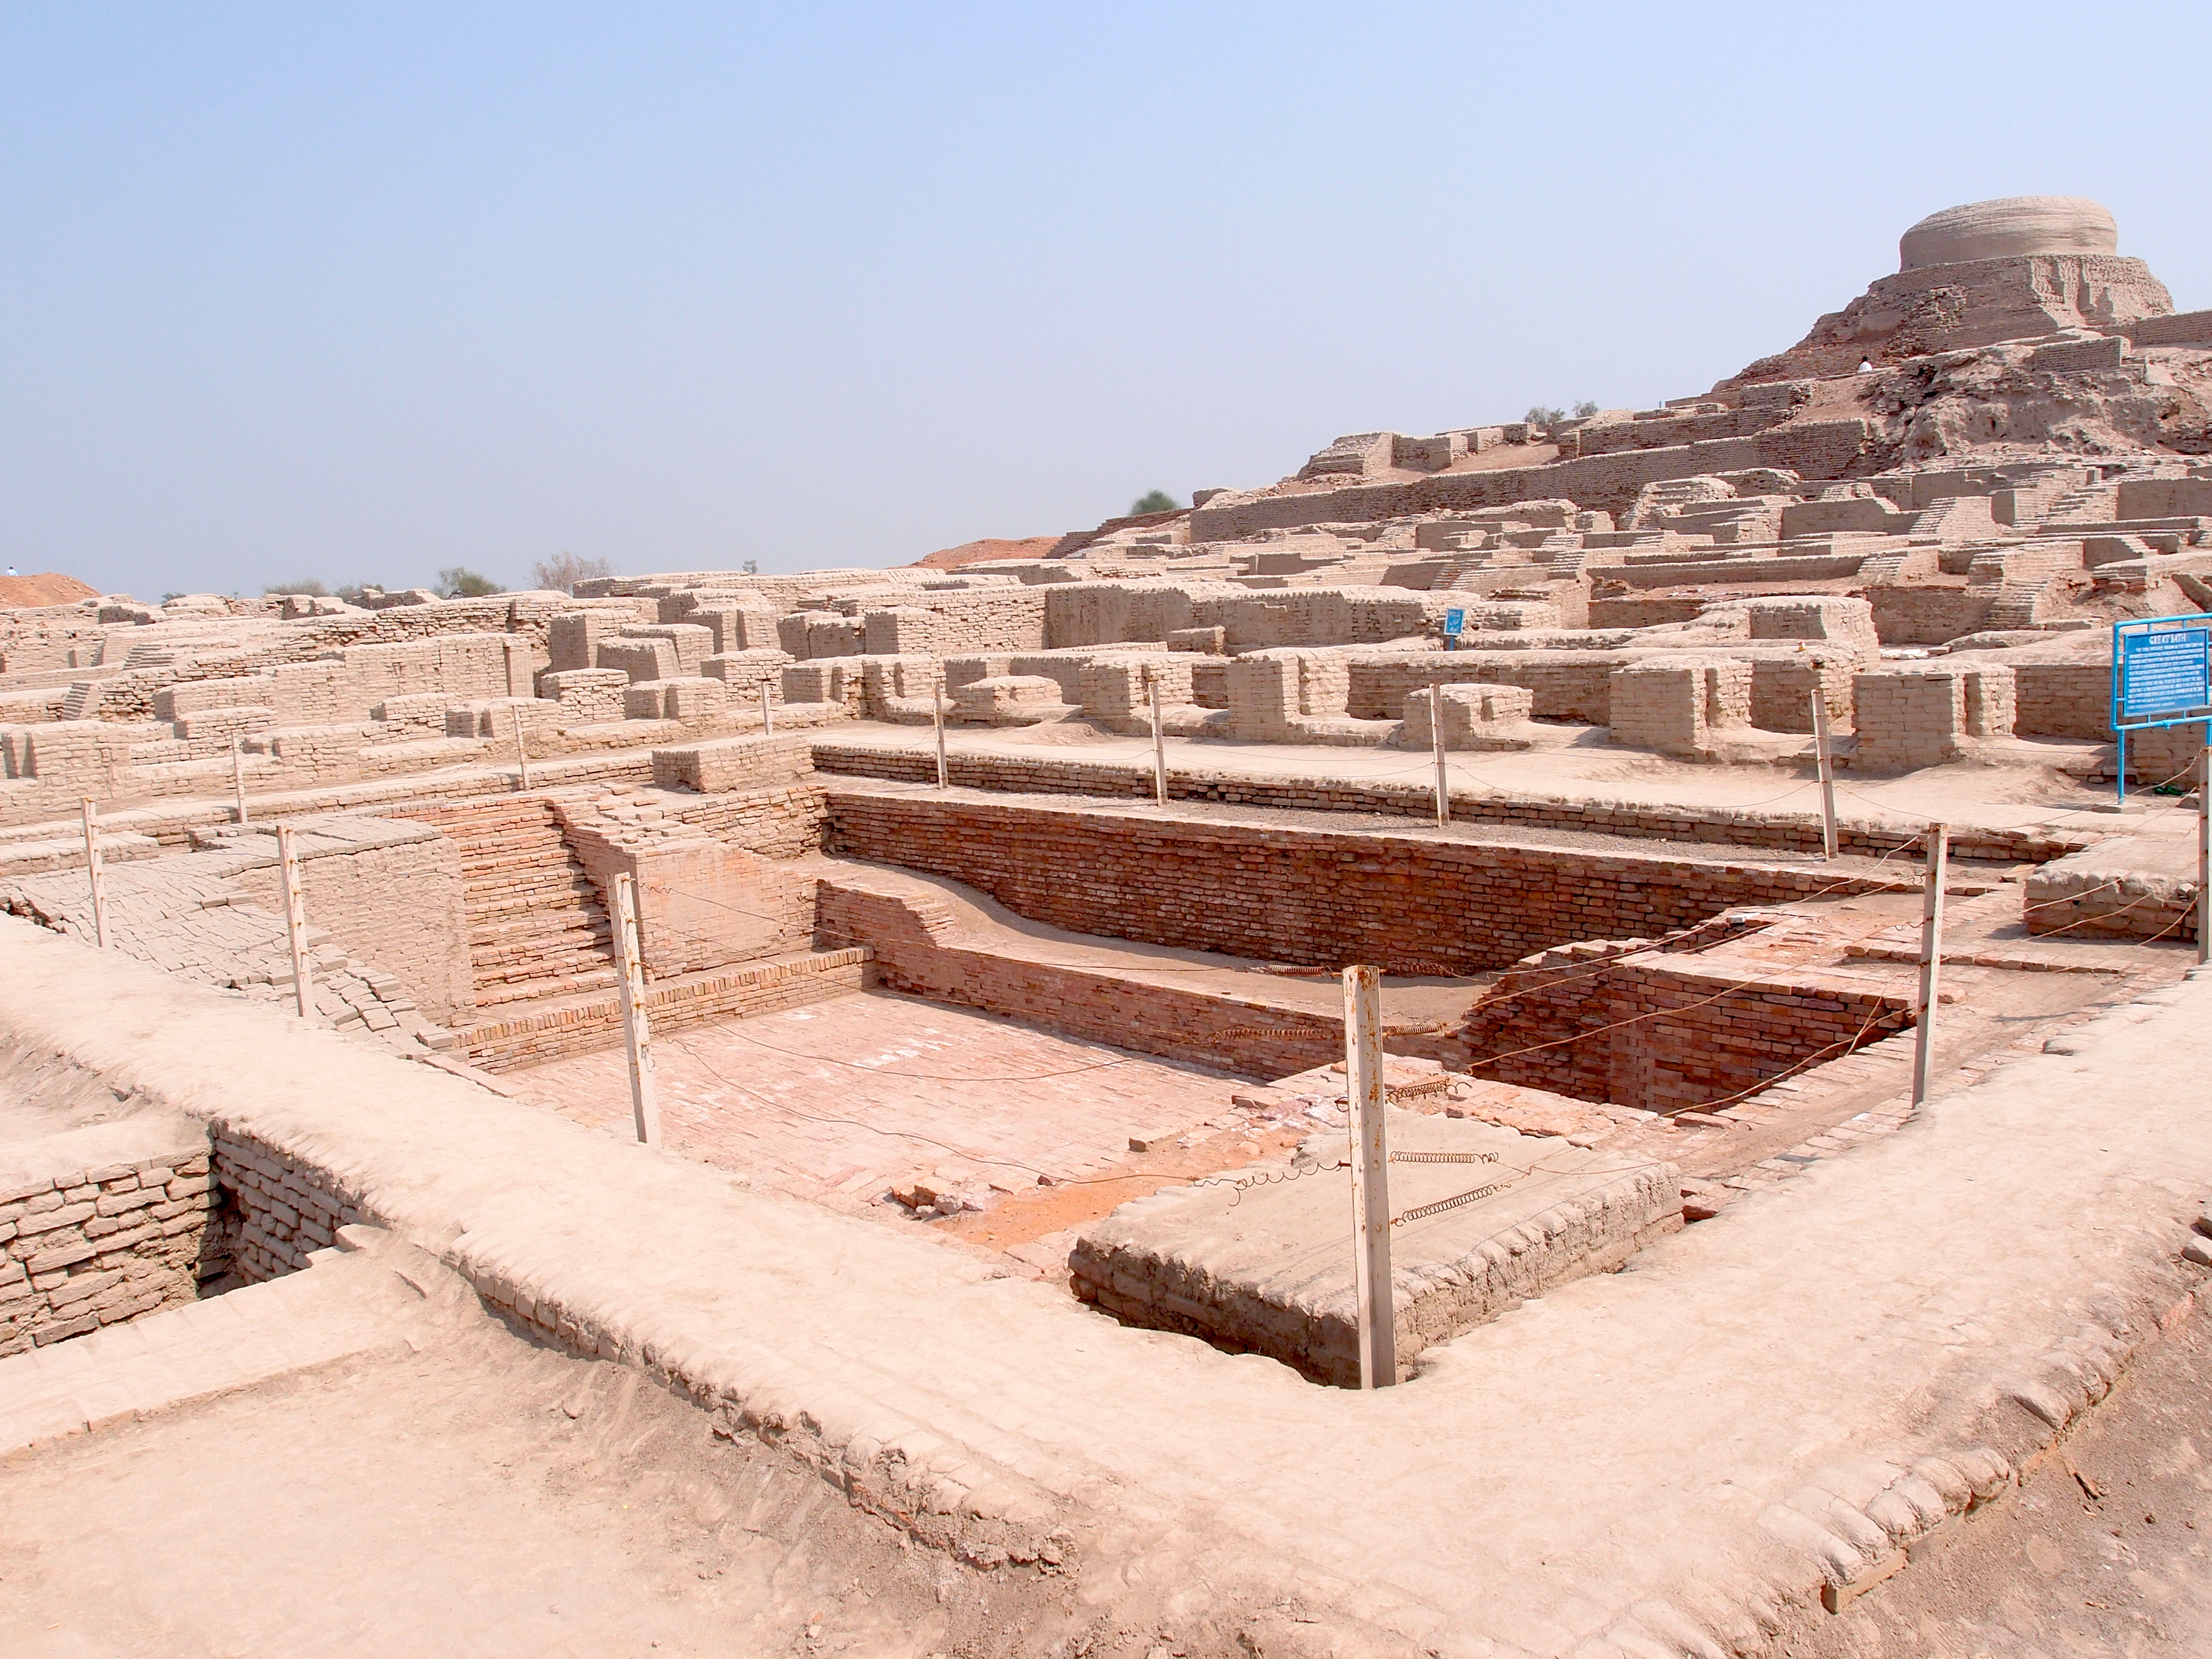 The Great Bath at Mohenjo-daro: Amid the brick ruins of a 3rd-millennium BCE city, stairs descend on two sides into a large, rectangular brick-lined pit.  Wooden stakes and wire encircle the perimeter, preventing entry by modern-day tourists.